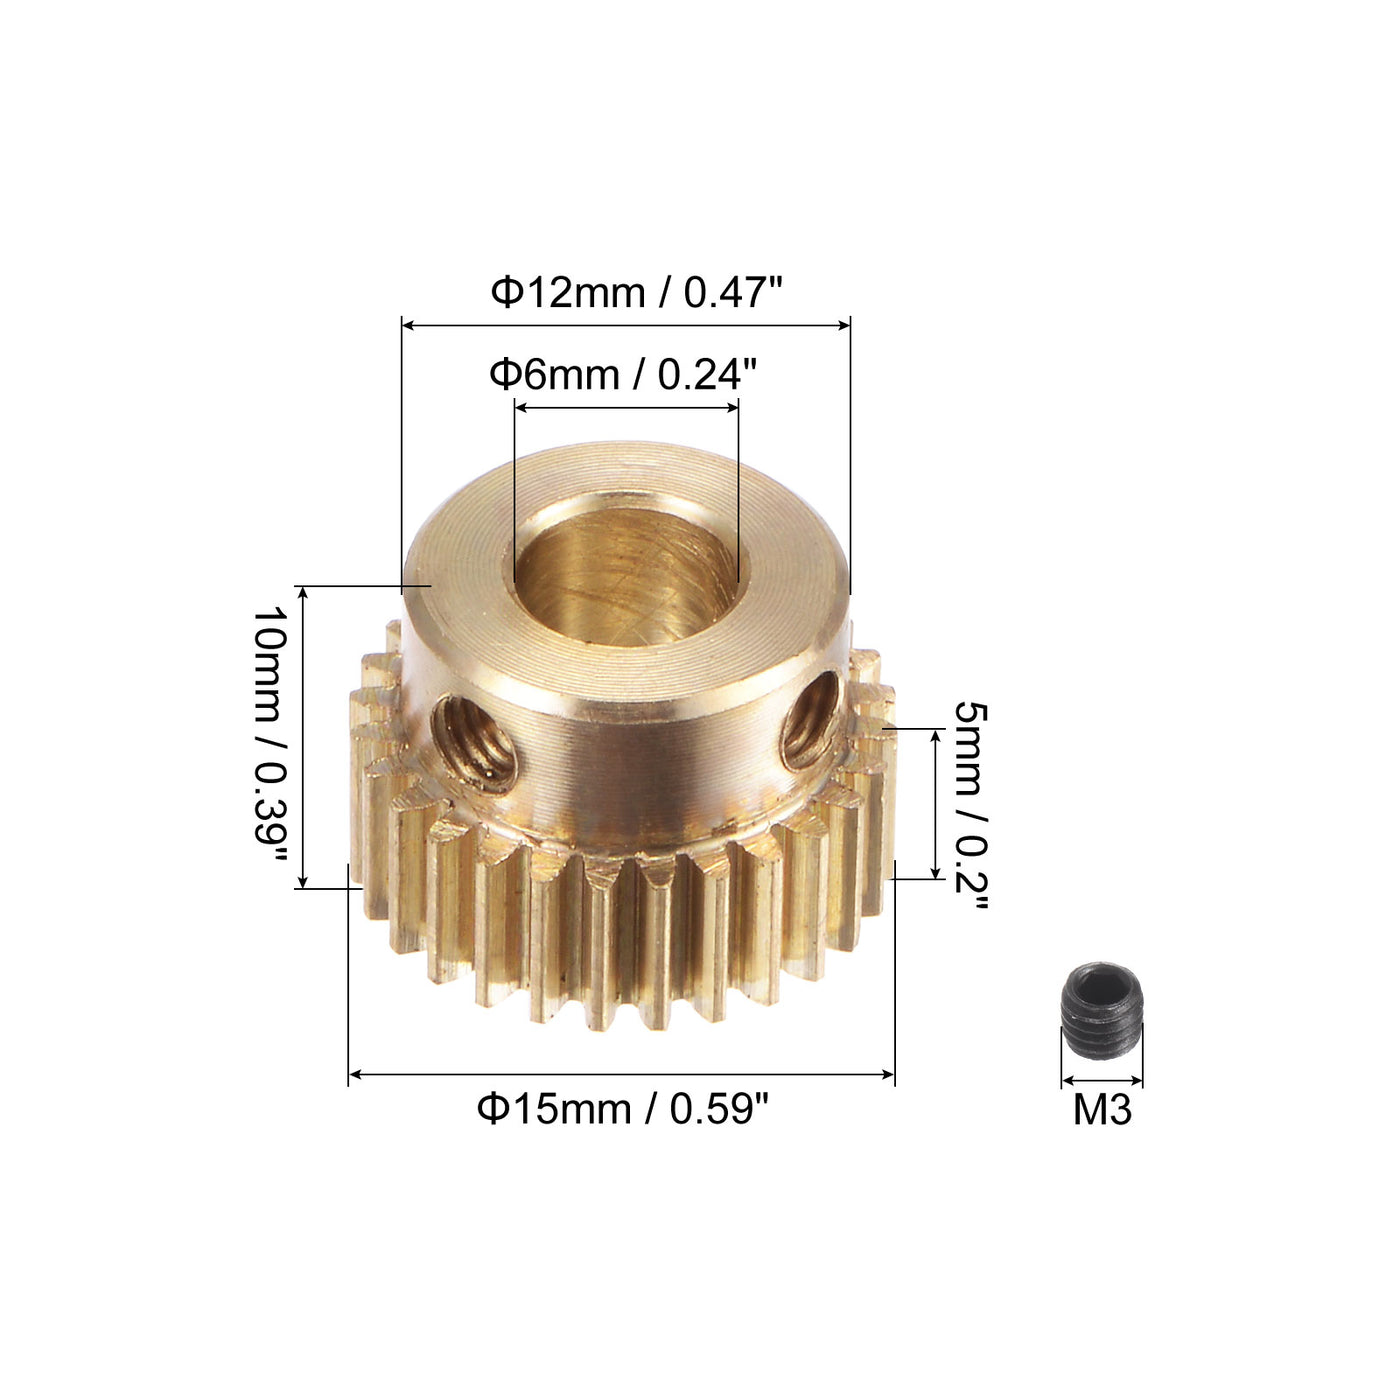 uxcell Uxcell 0.5 Mod 28T 6mm Bore 15mm Outer Dia Brass Motor Rack Pinion Gear with Screws